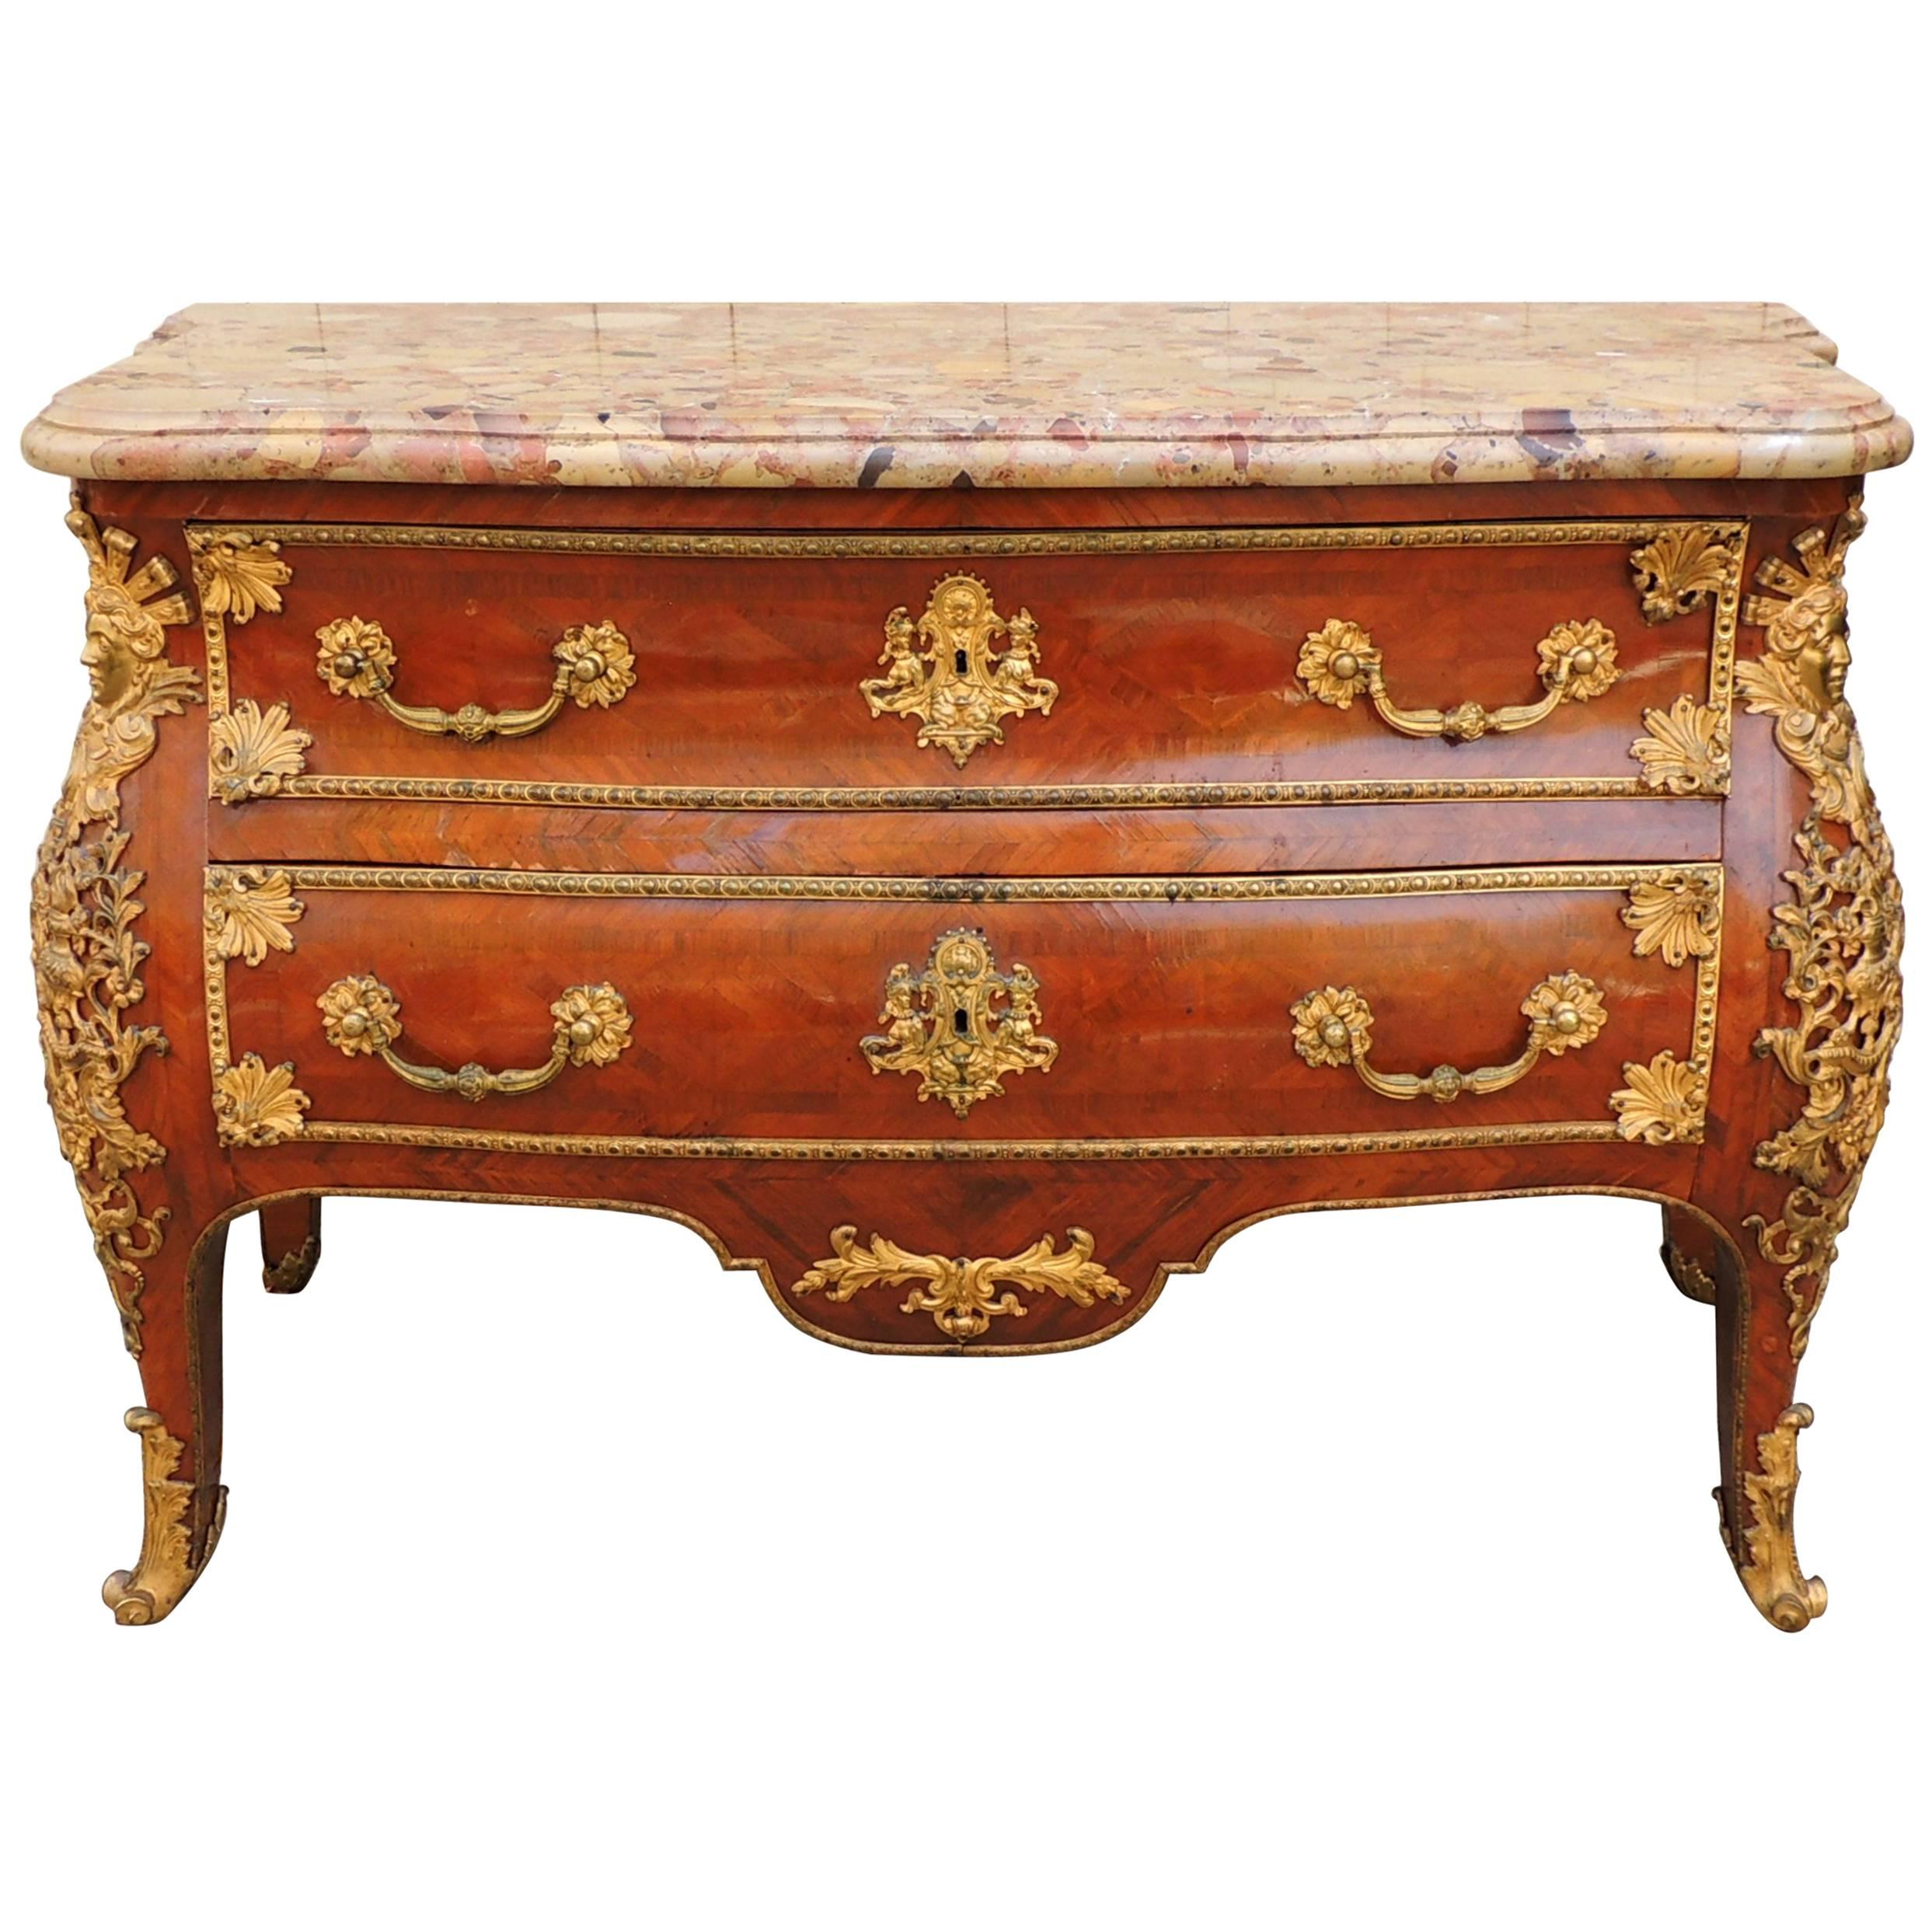 Wonderful French 19th Century Louis XV Ormolu Bronze-Mounted Marble-Top Commode